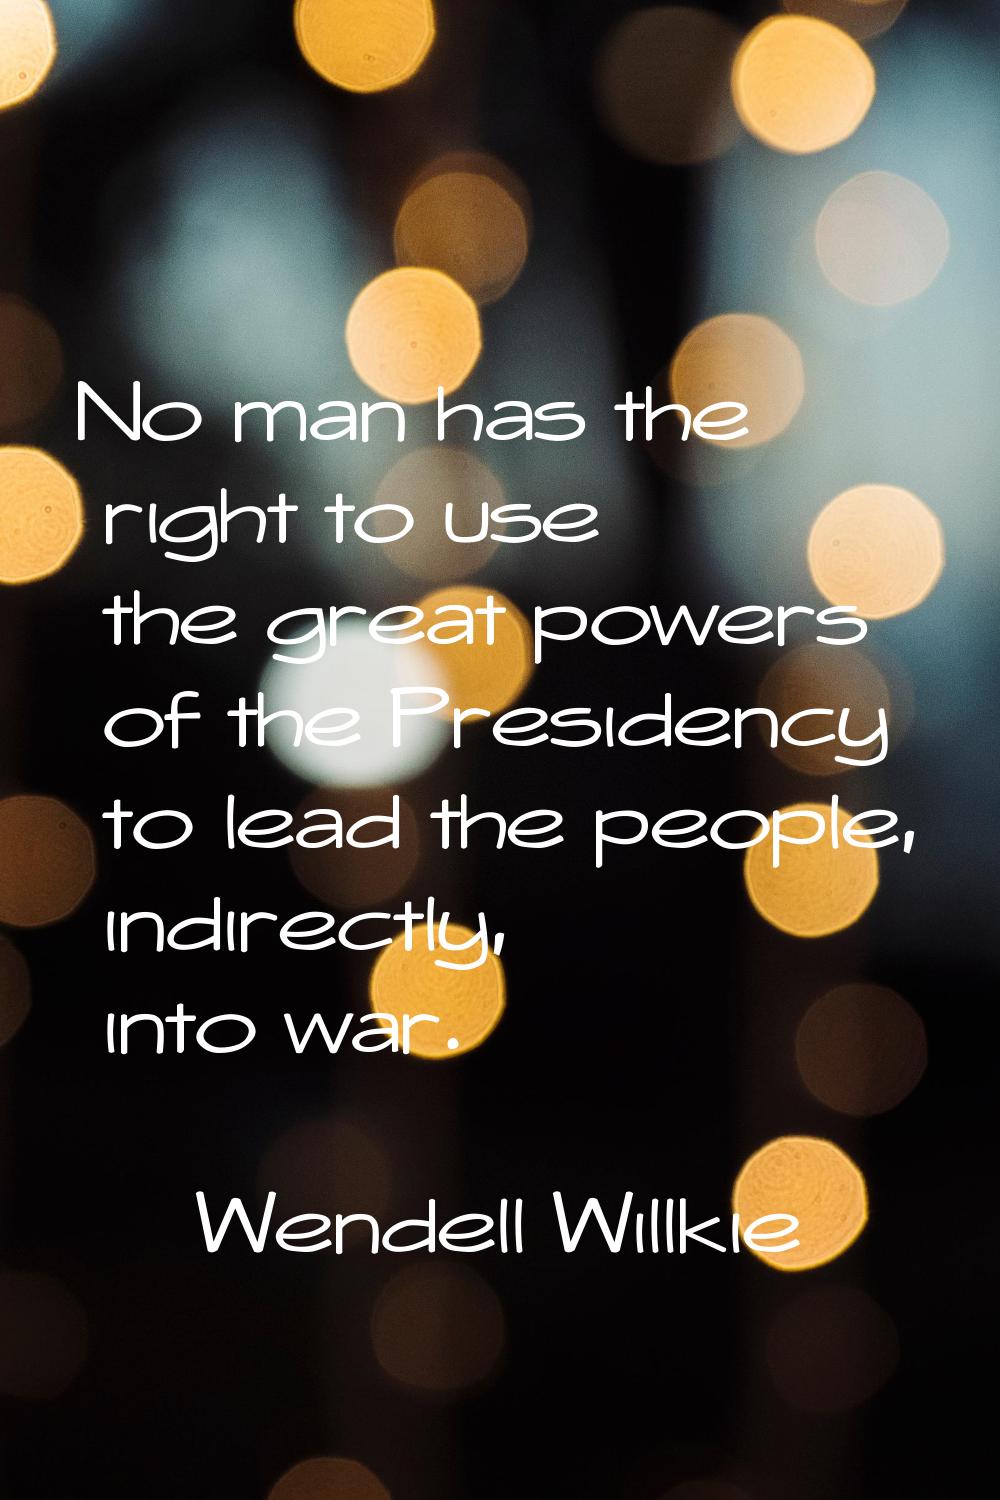 No man has the right to use the great powers of the Presidency to lead the people, indirectly, into